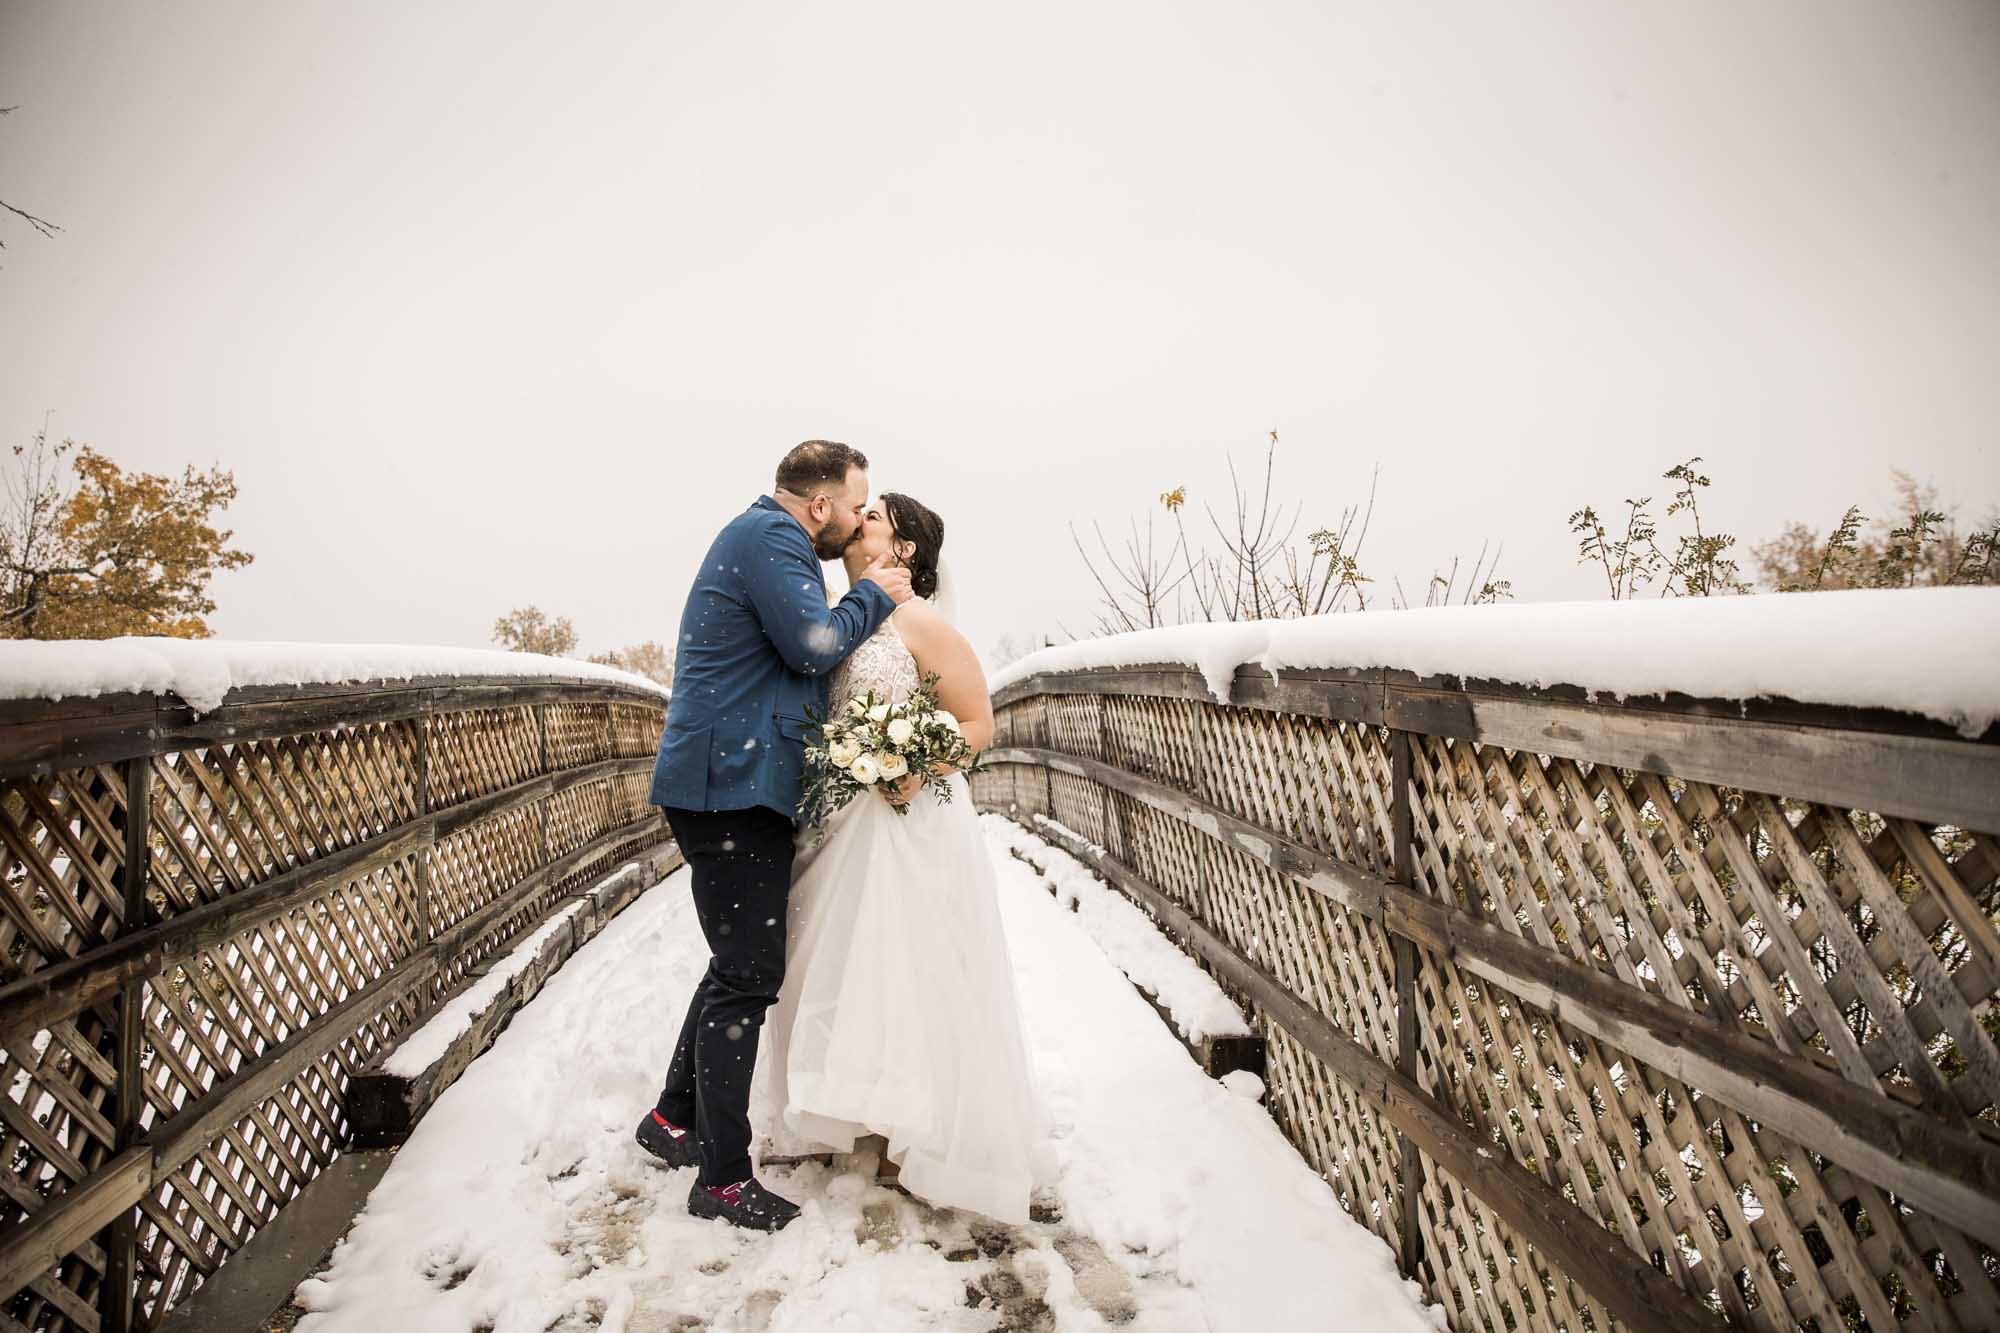 Calgary wedding photographer, bride in her dress with her bridal flowers and groom on their wedding day at St Patrick's Island, winter snow and fall leaves